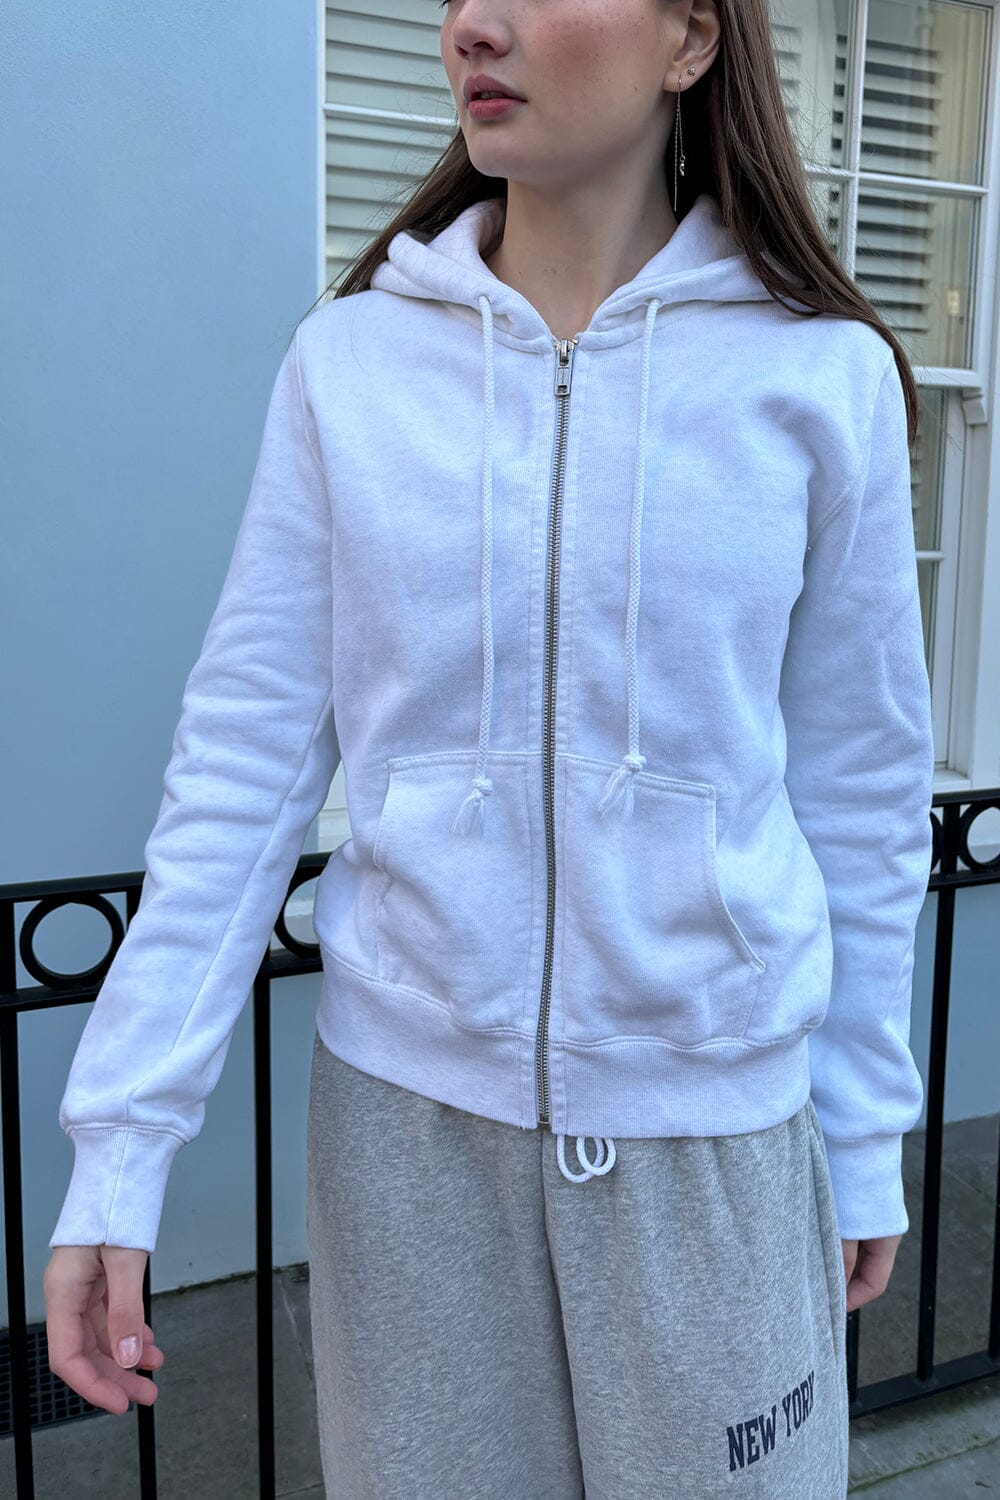 Brandy Melville Christy Hoodie Pink - $33 New With Tags - From Gisselle